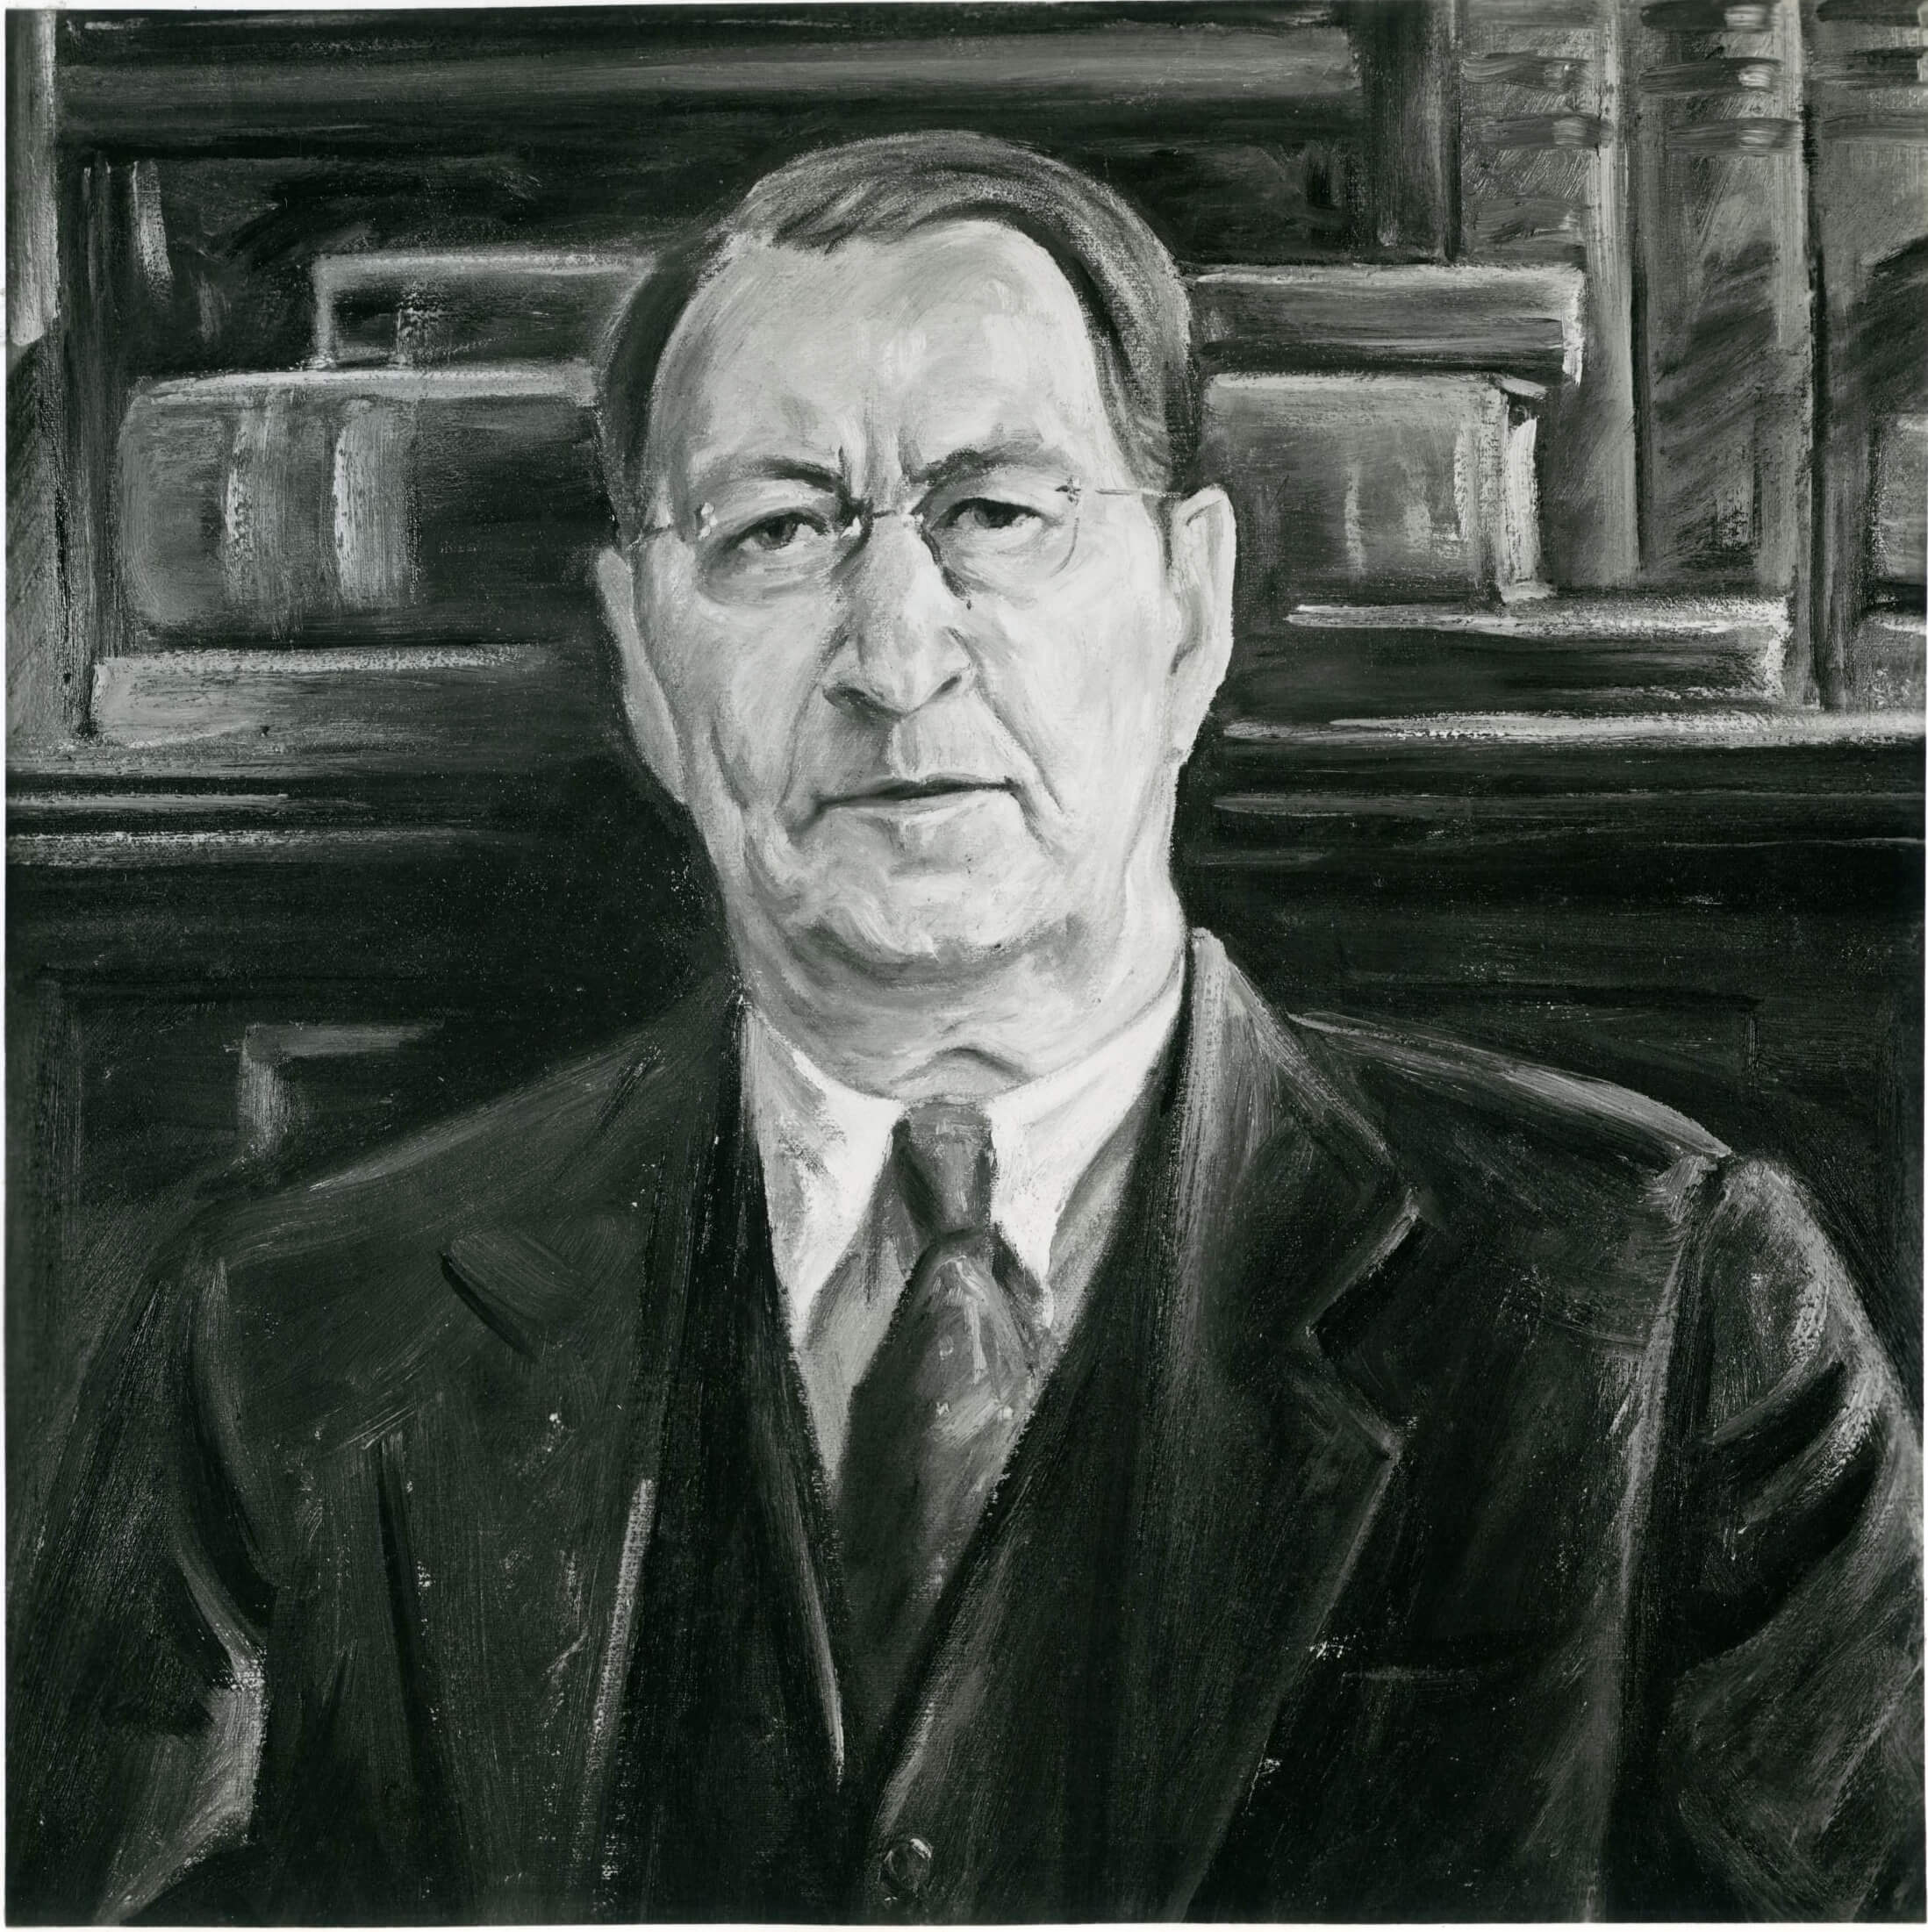 Portrait of a man wearing a suit and tie with books behind him